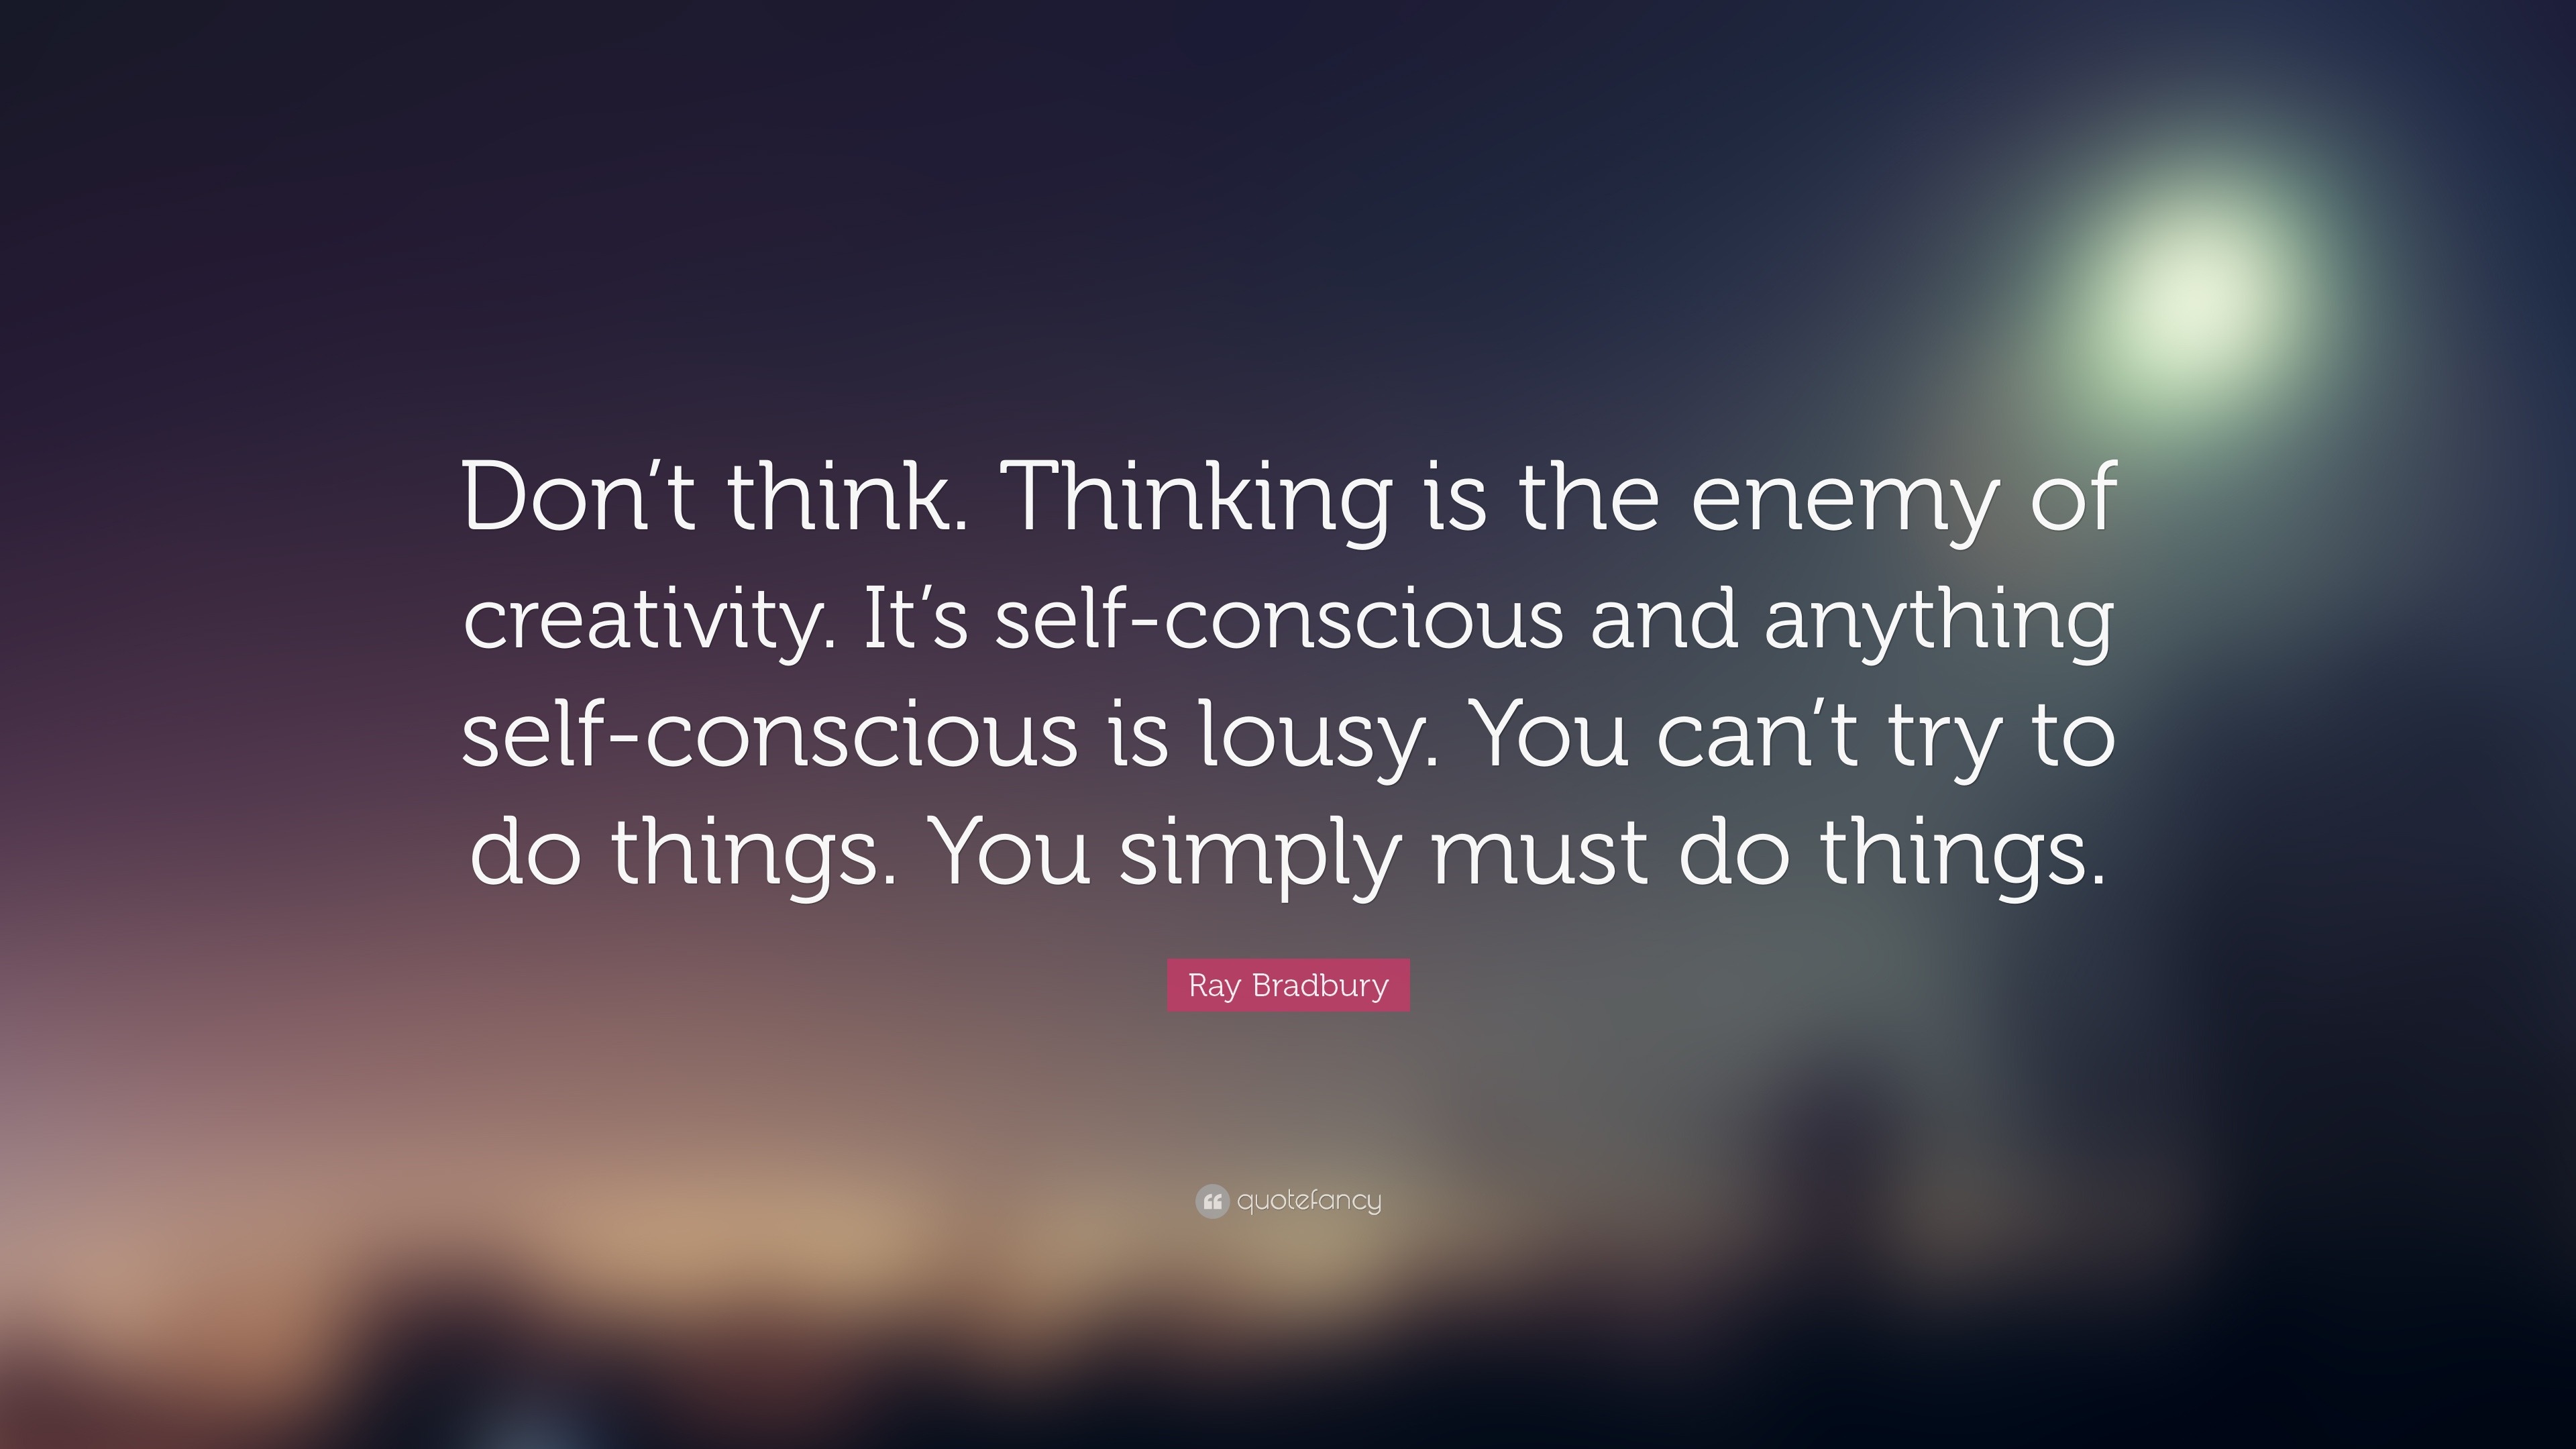 Ray Bradbury Quote: “Don’t think. Thinking is the enemy of creativity ...